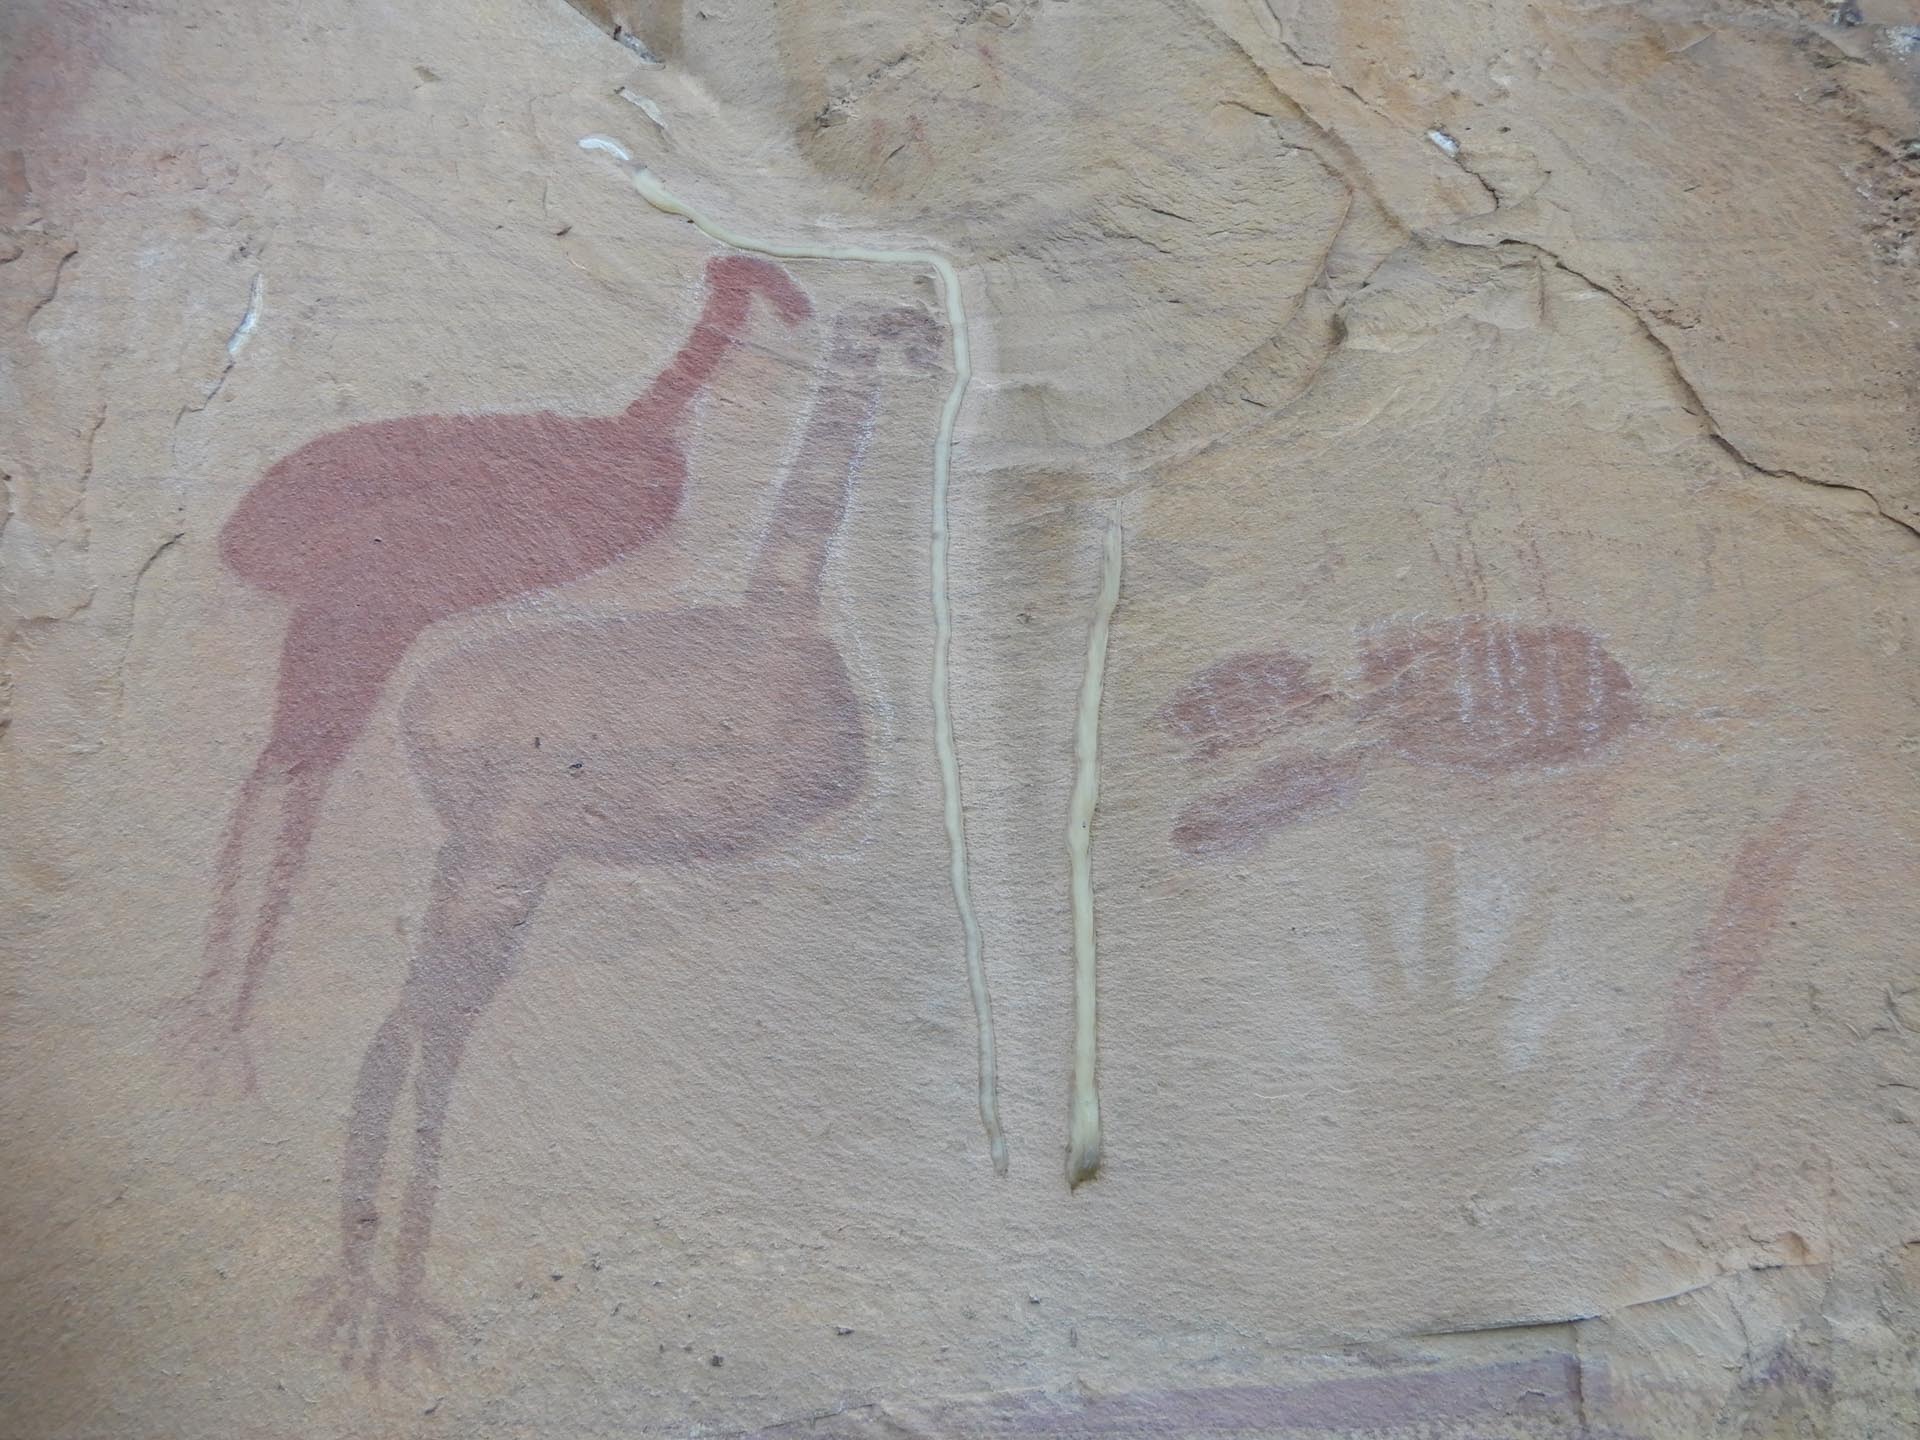 The ‘Big 3’ Hikes of the NT: How Do They Compare?, hiking, northern territory, jatbula trail, mountains, indigenous culture, multi-day hike, indigenous rock art seen on the jatbula trail